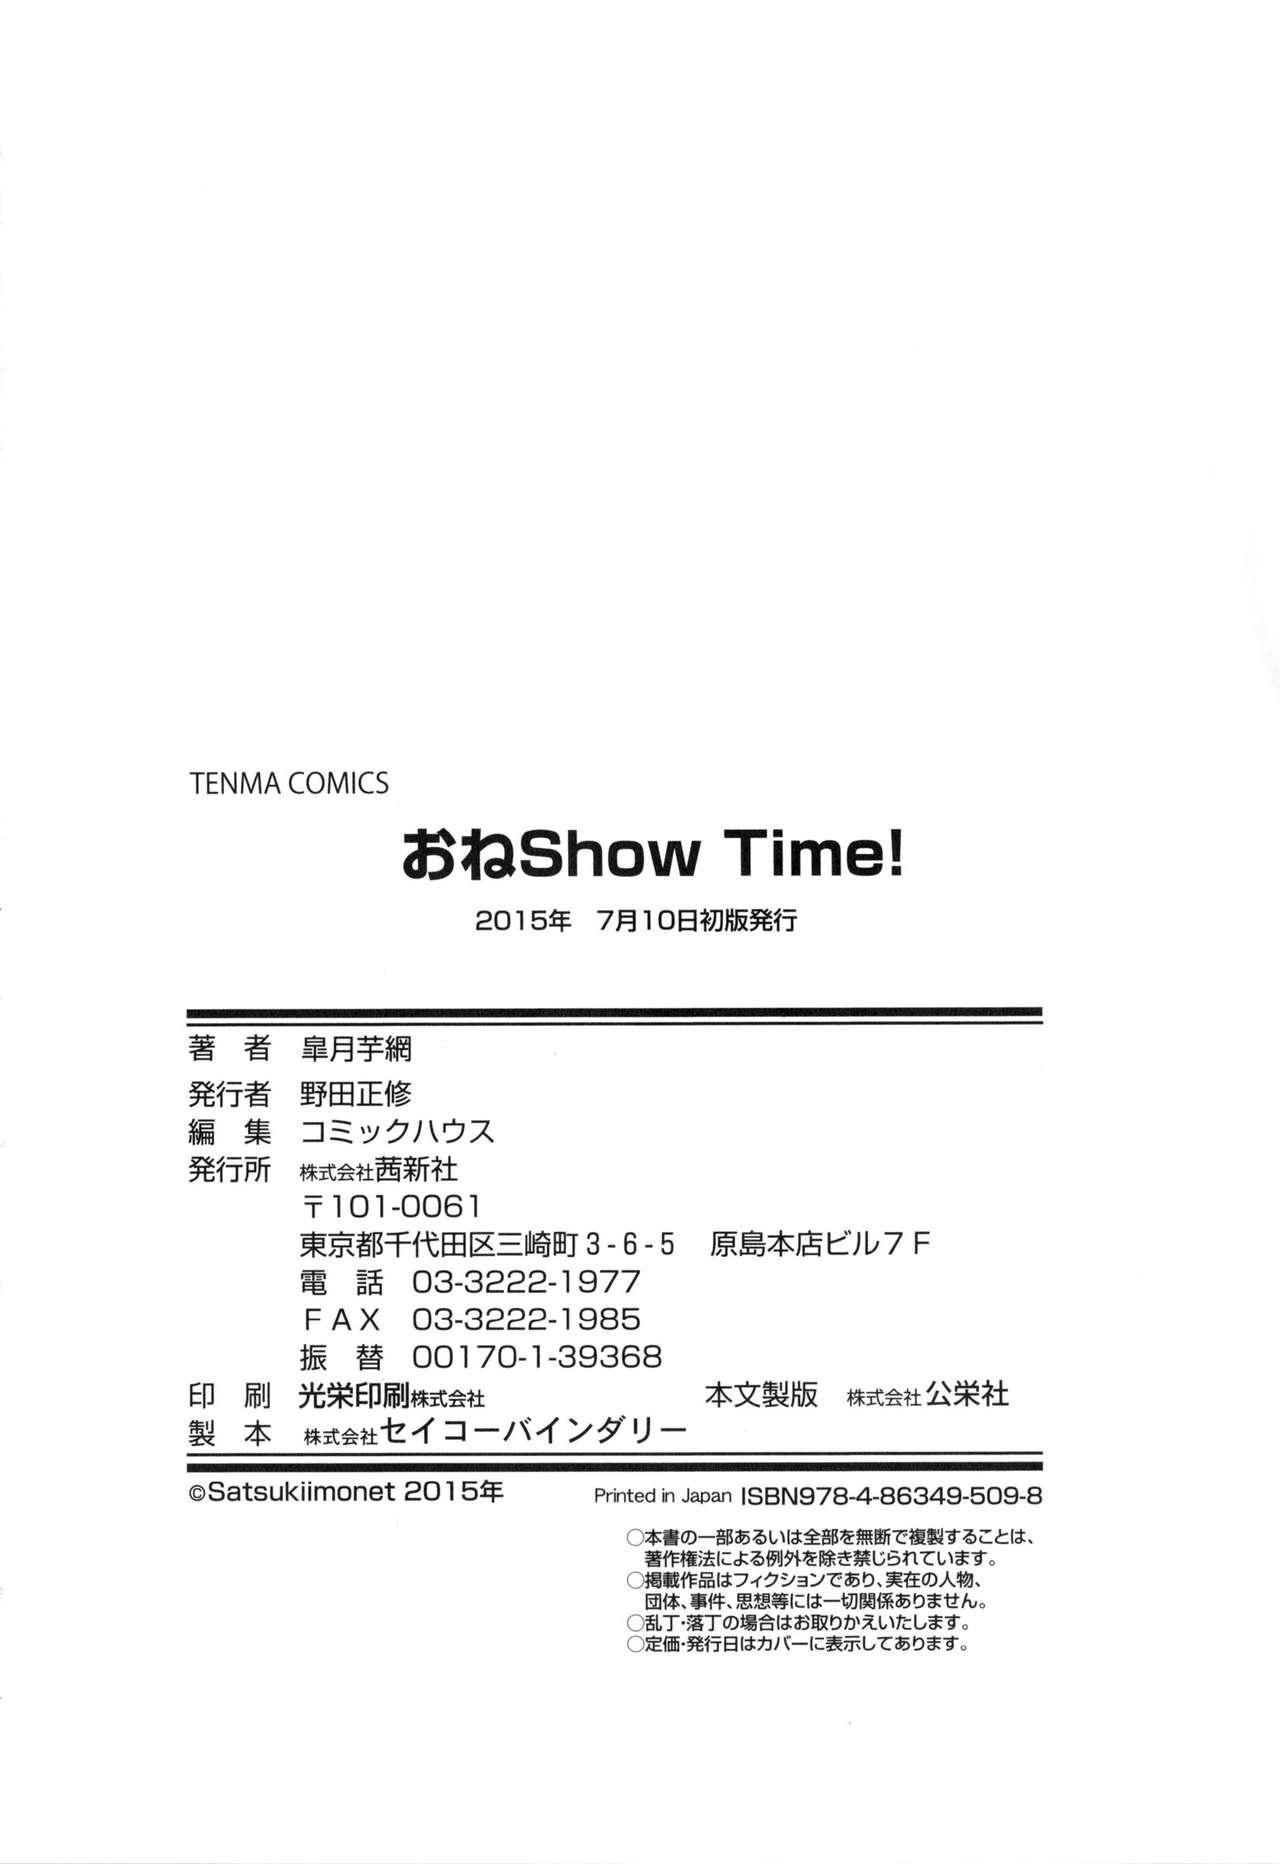 One Show Time! 188